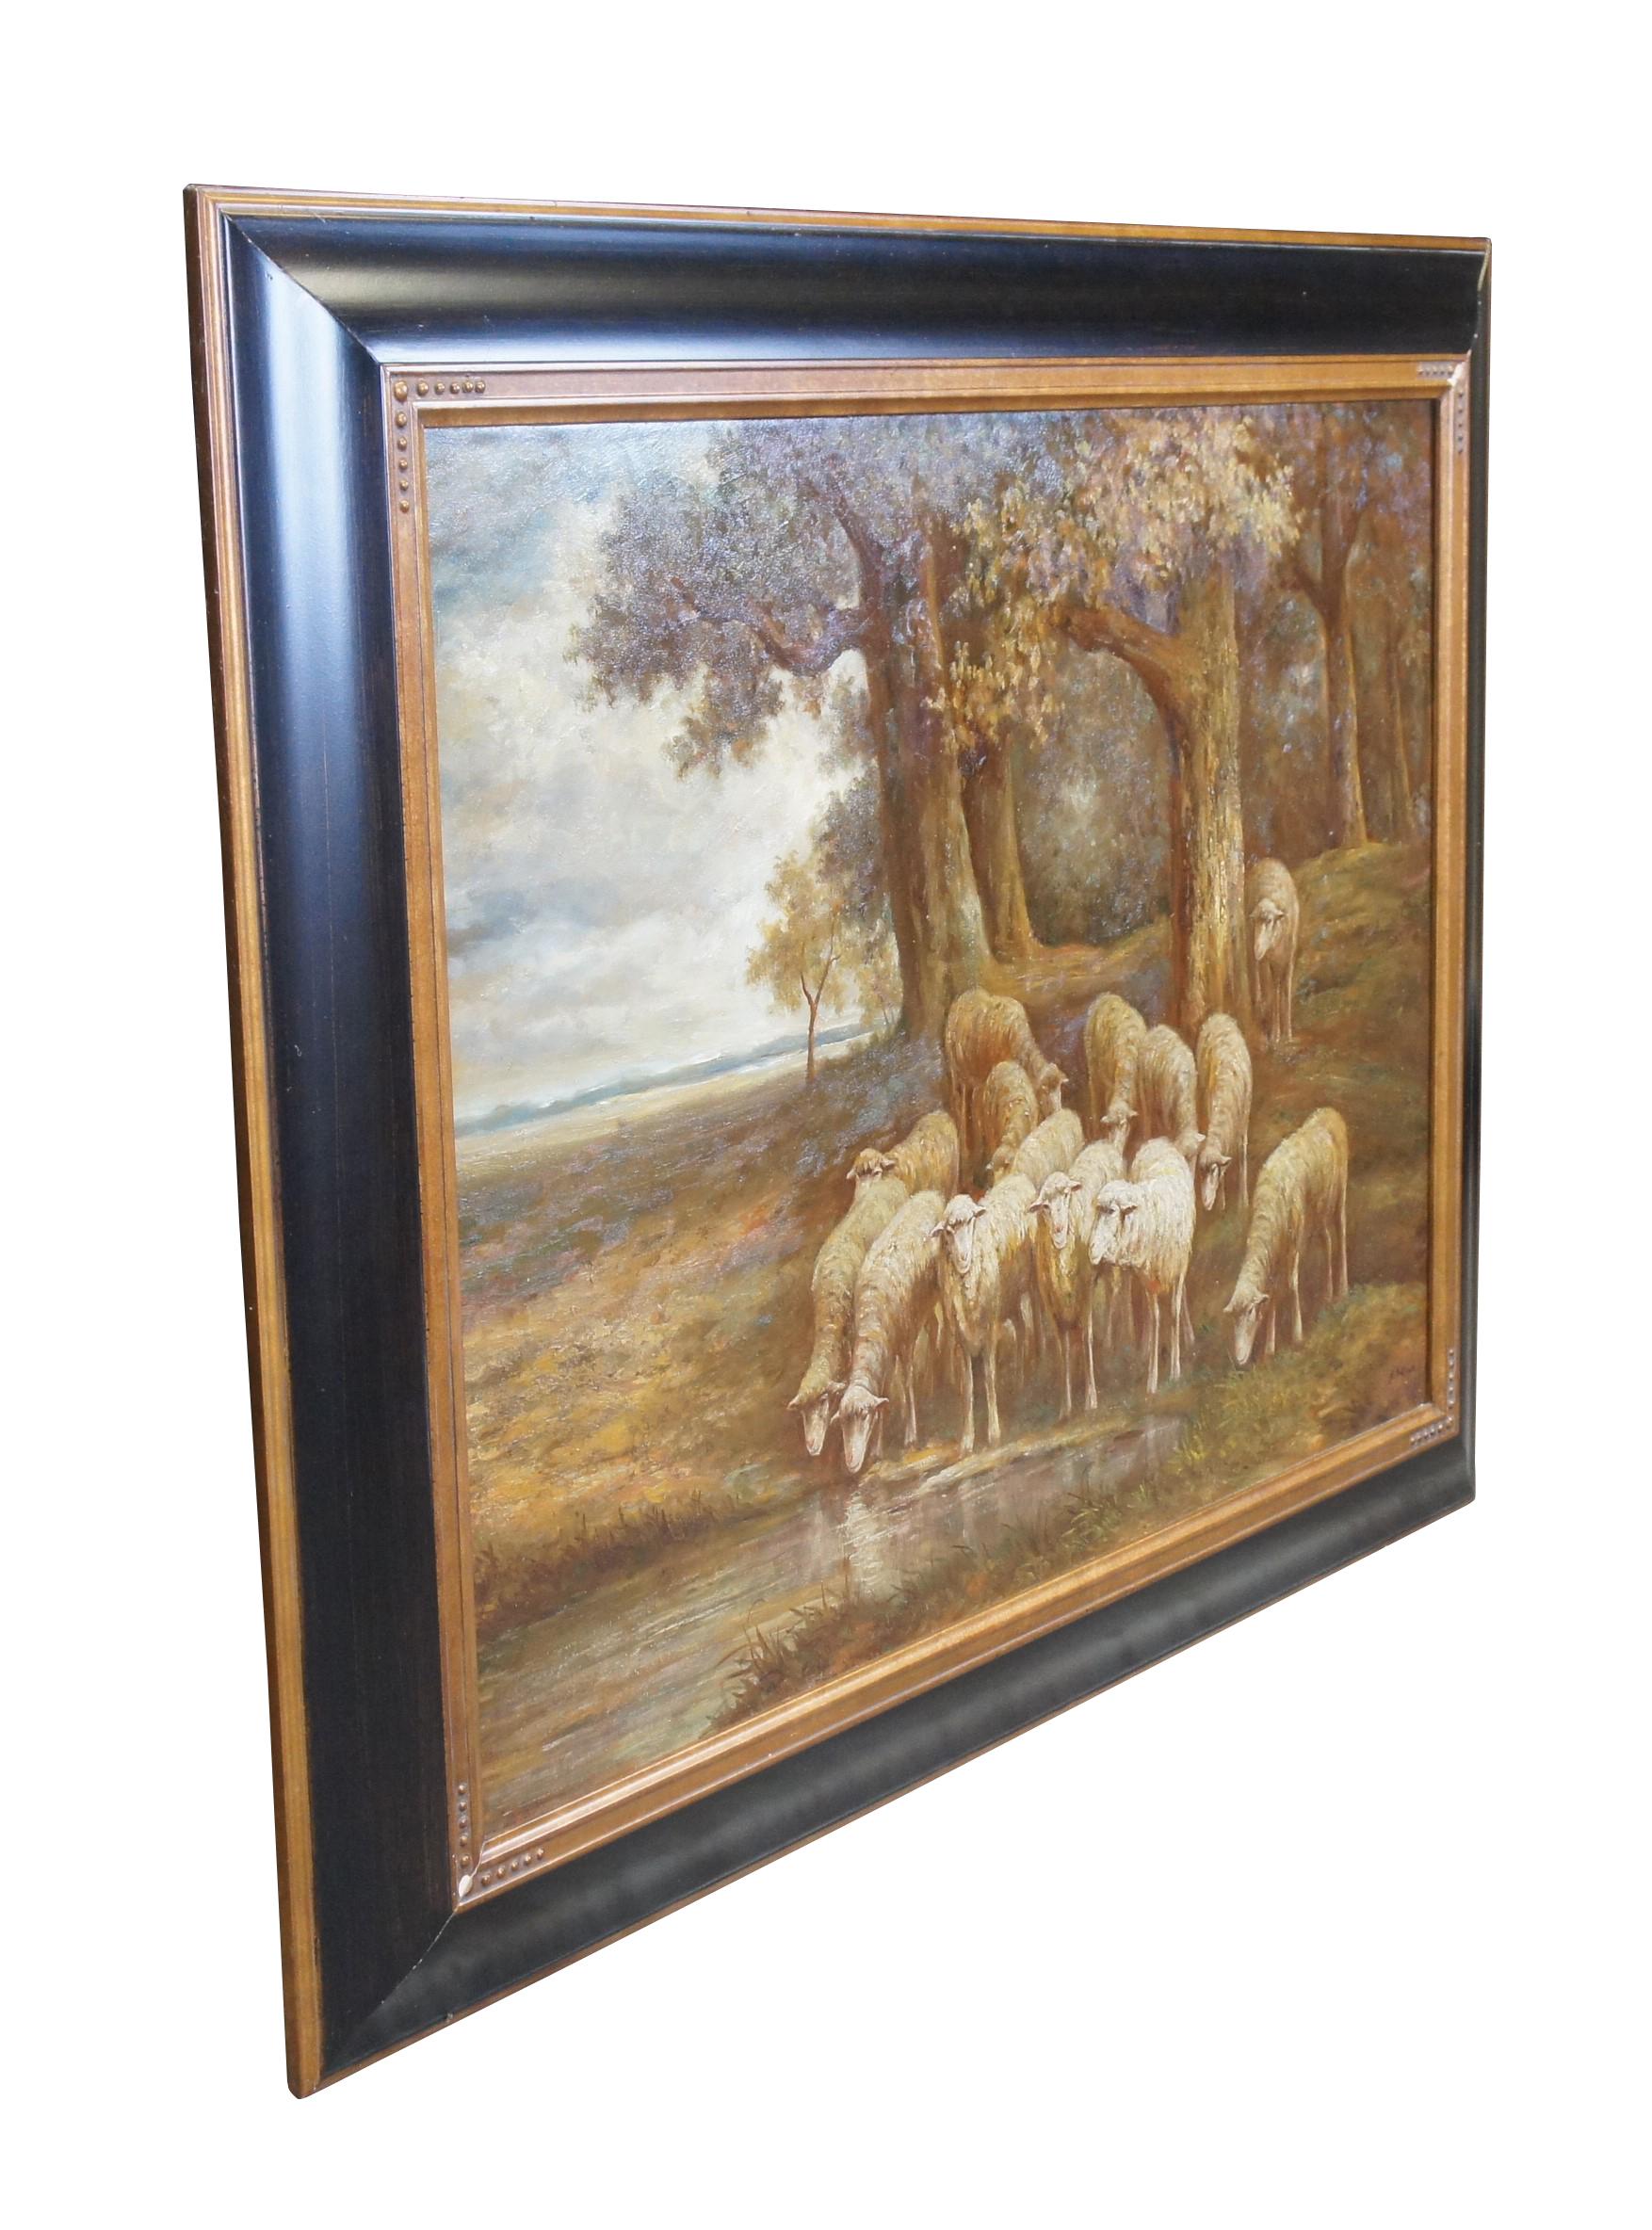 A very large vintage H Assteyn oil painting on canvas featuring a flock of sheep / lamb grazing at the edge of a forest.  Framed in ebonized gold trim frame.

Dimensions:
38.5